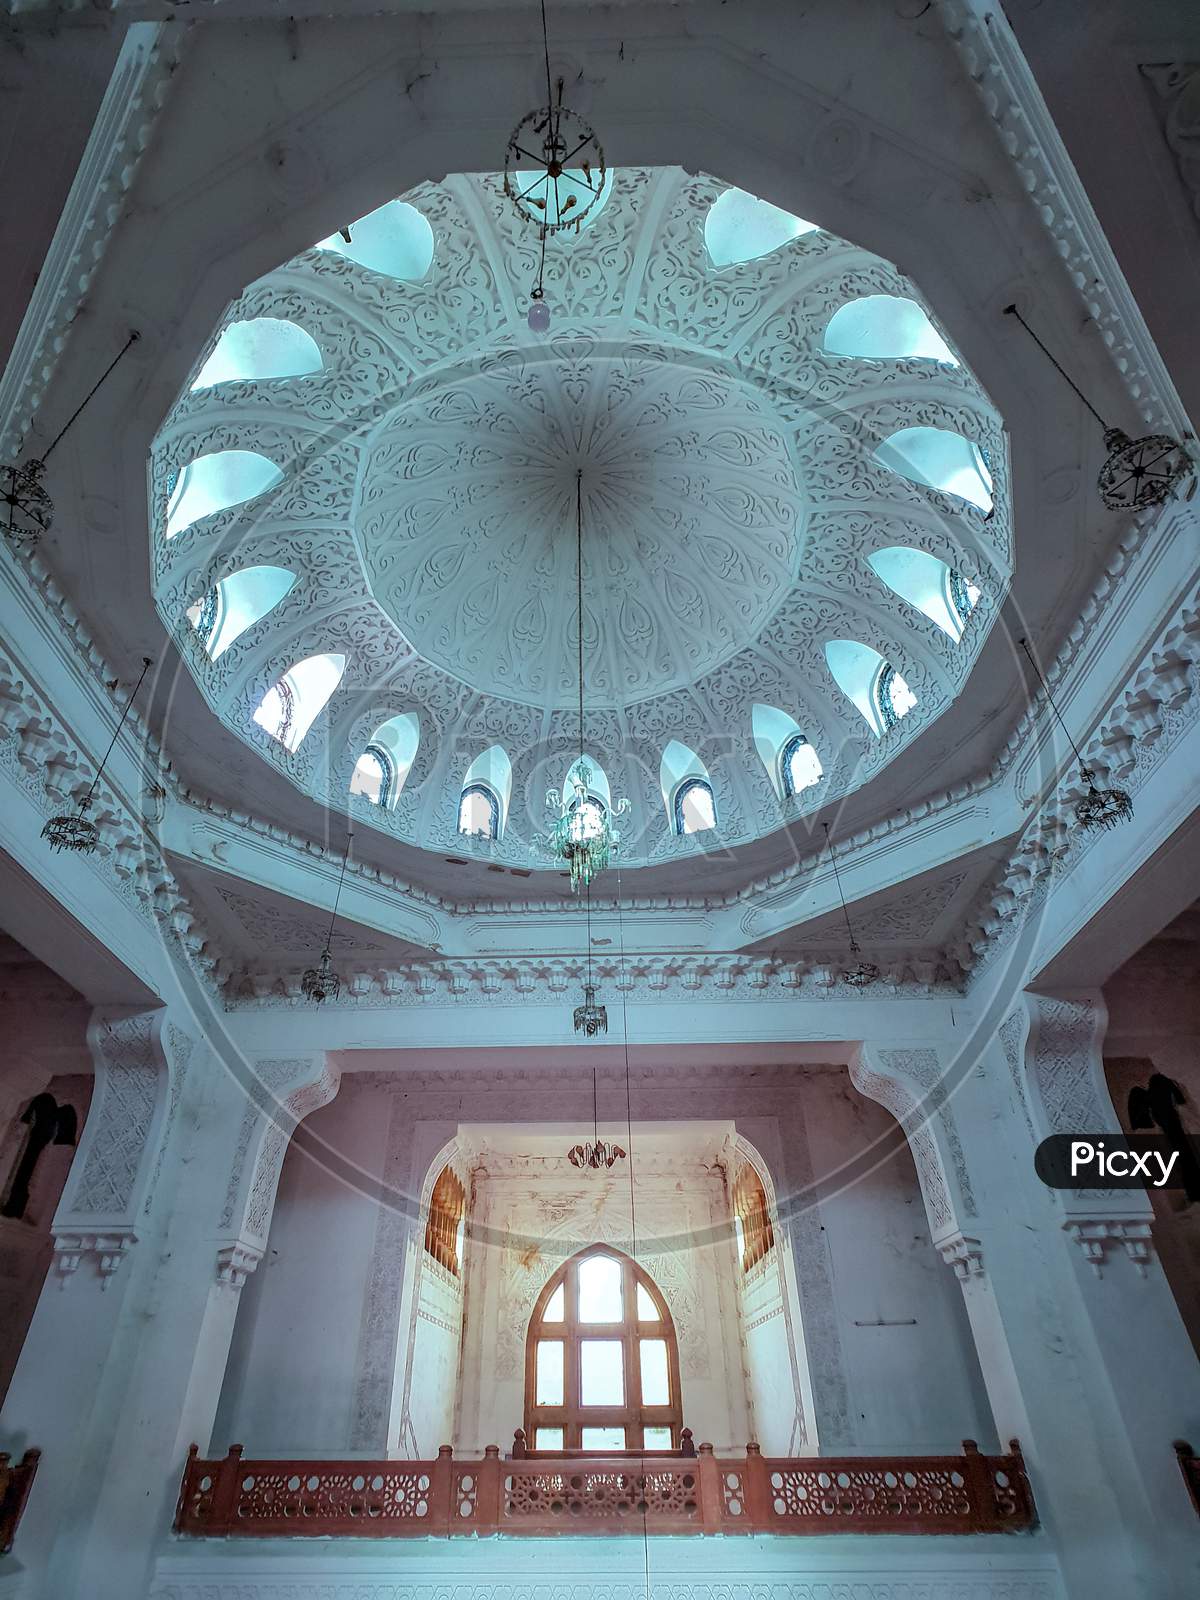 Architecture Of an Palace Interior With pillars And Dome Roof